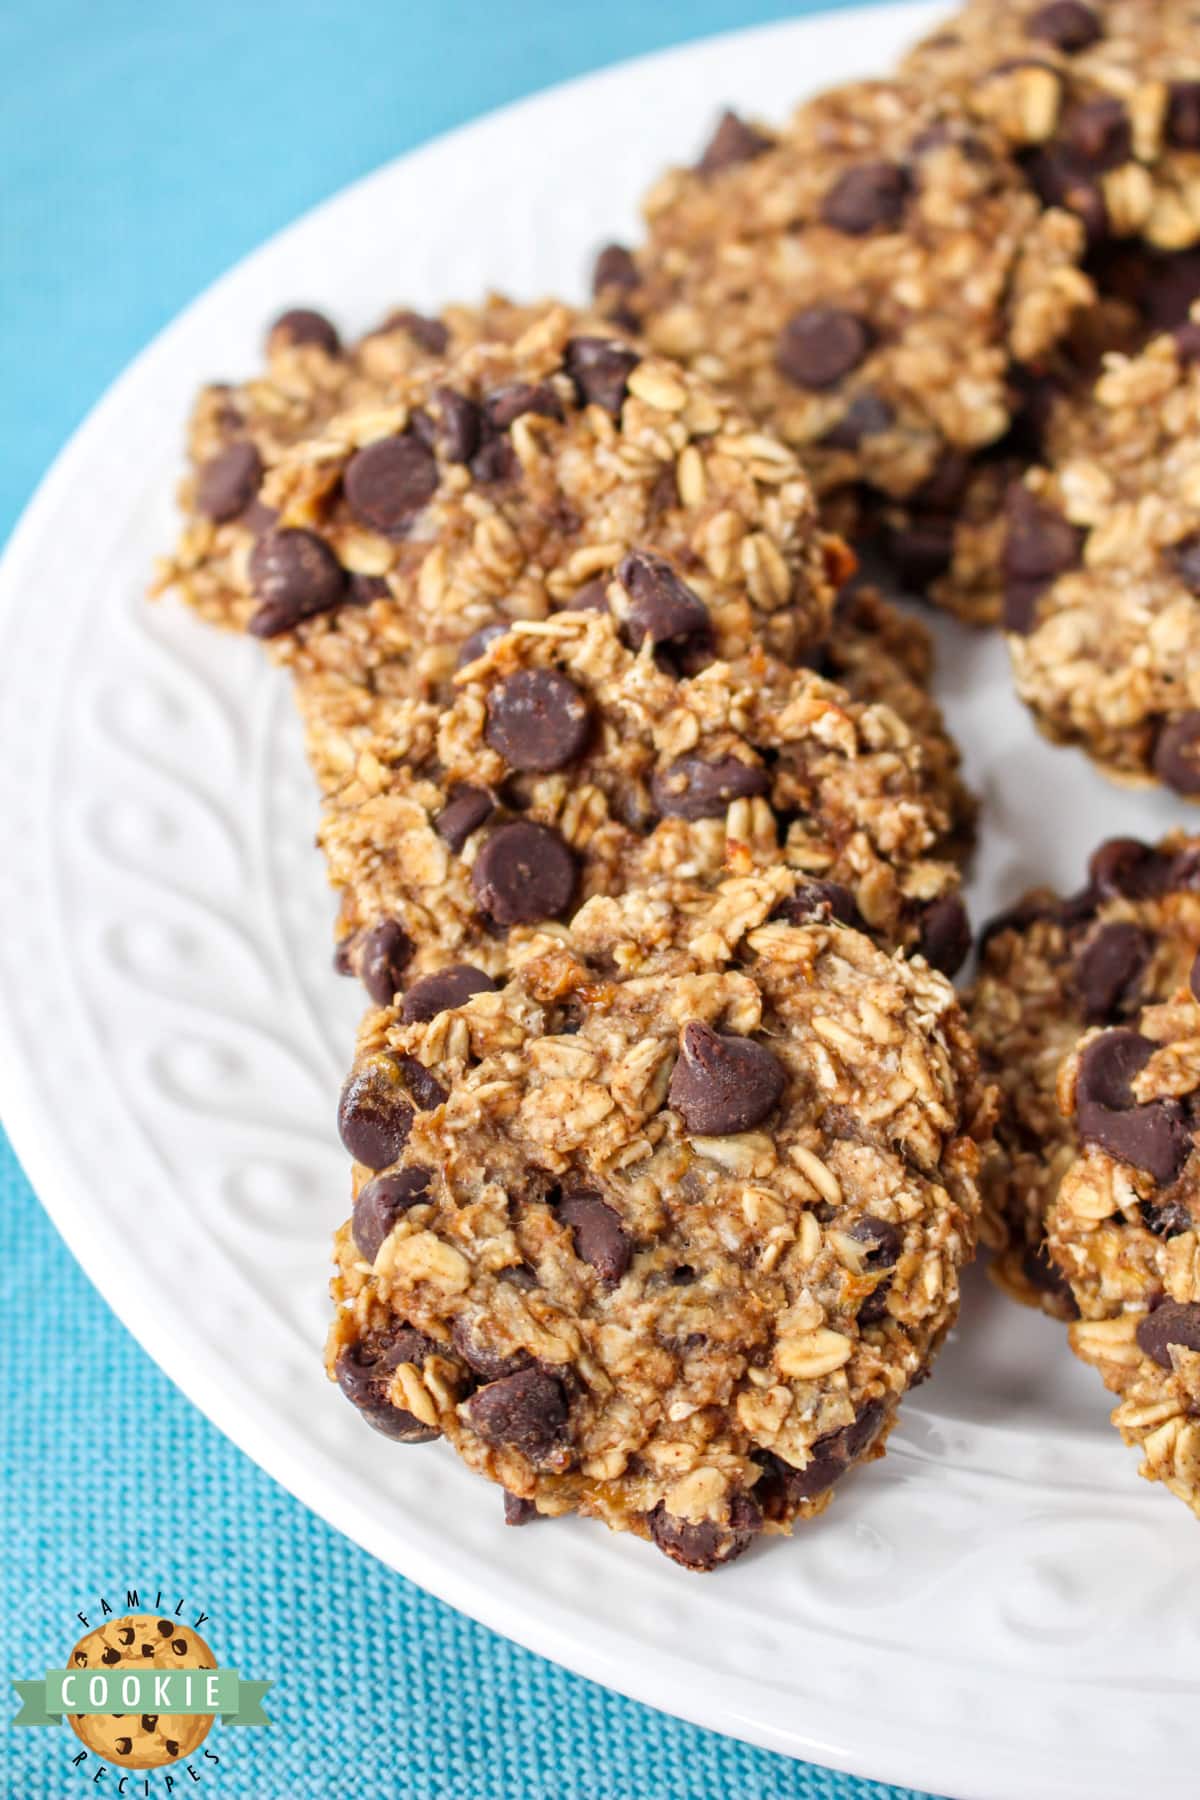 Healthy oatmeal cookies made with bananas